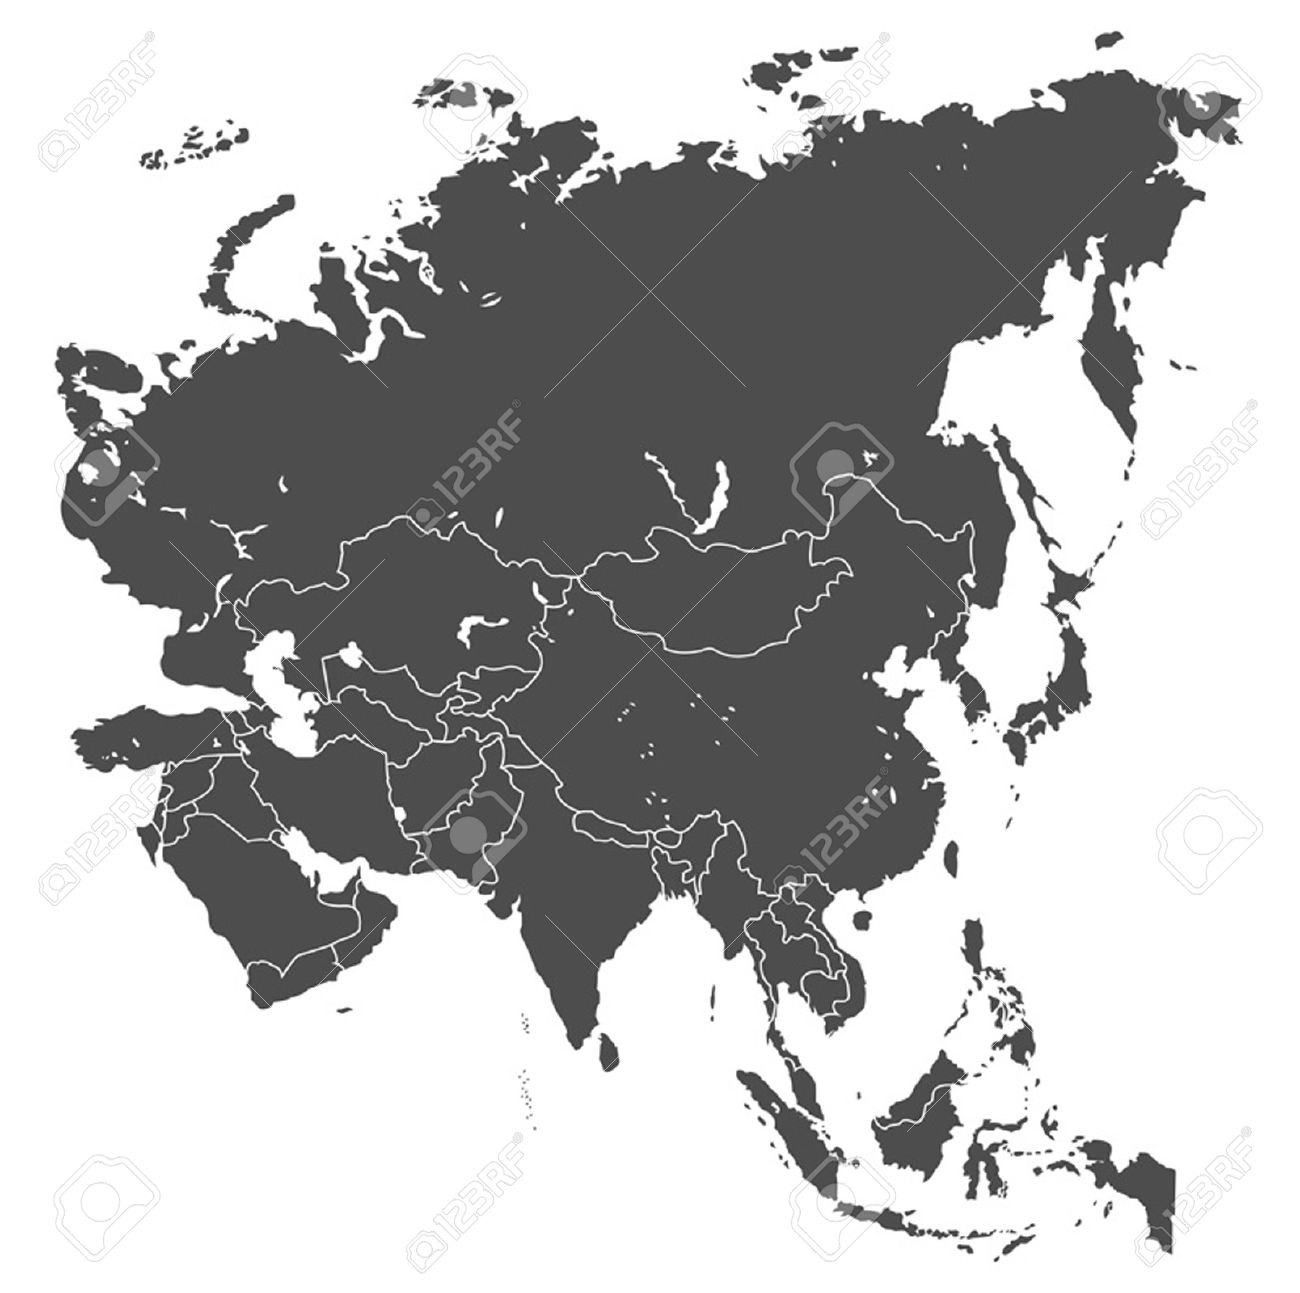 clipart map of asia - photo #22